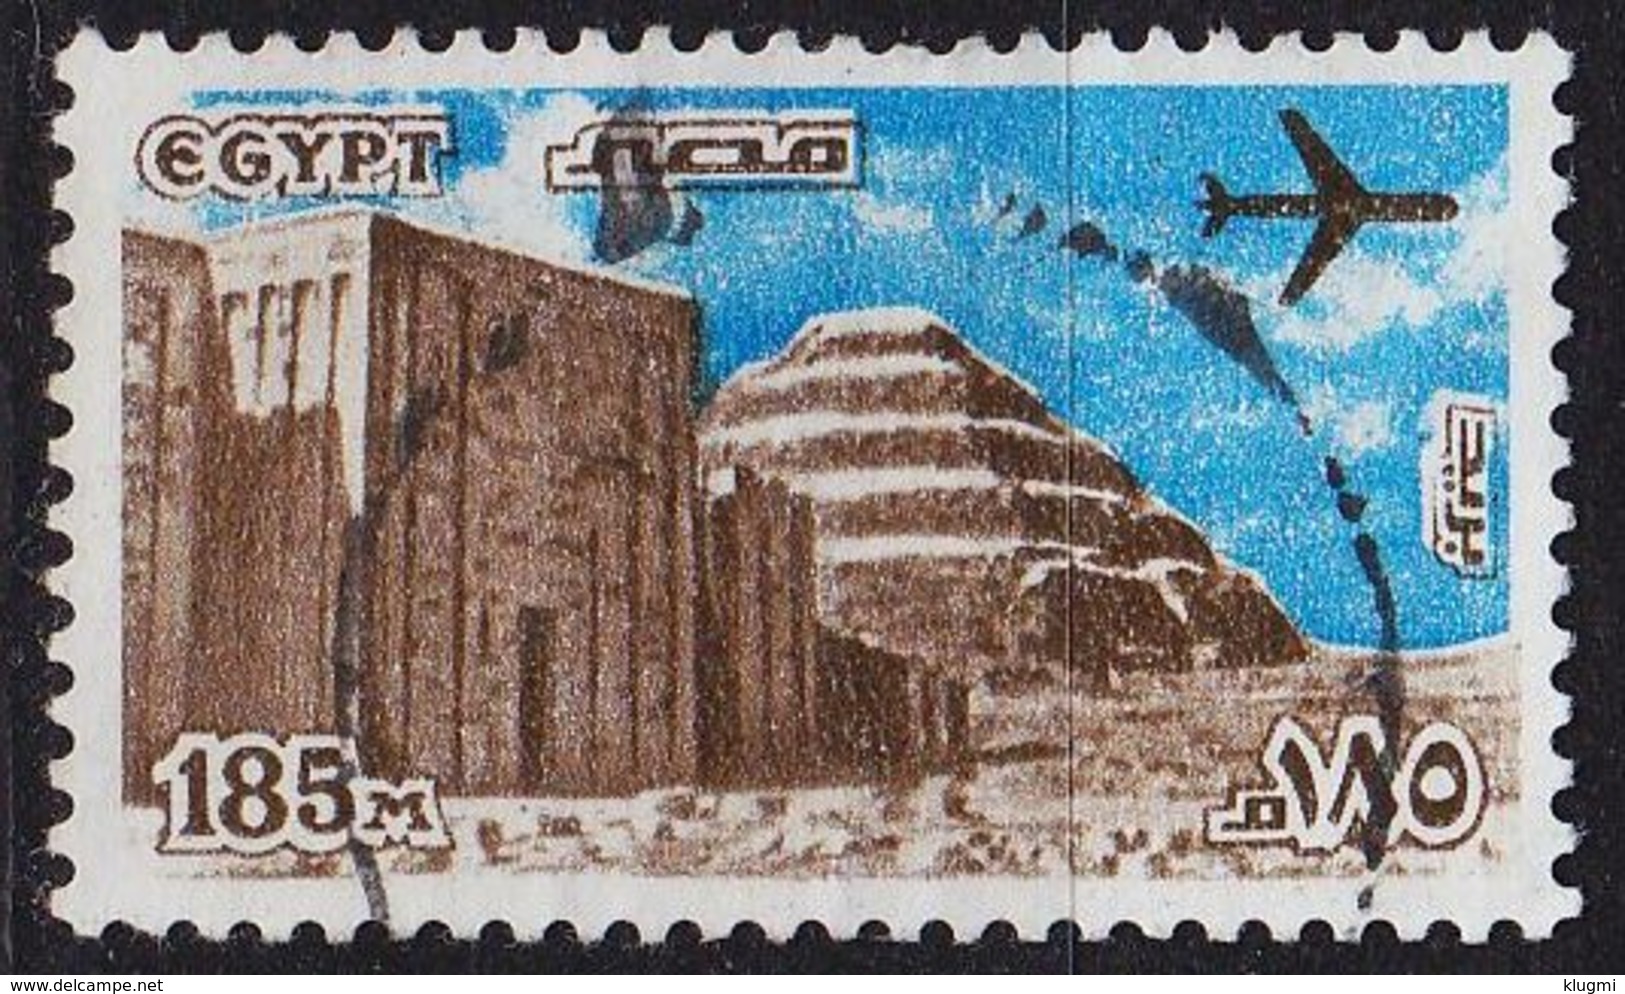 ÄGYPTEN EGYPT [1982] MiNr 0902(A) ( O/used ) - Used Stamps